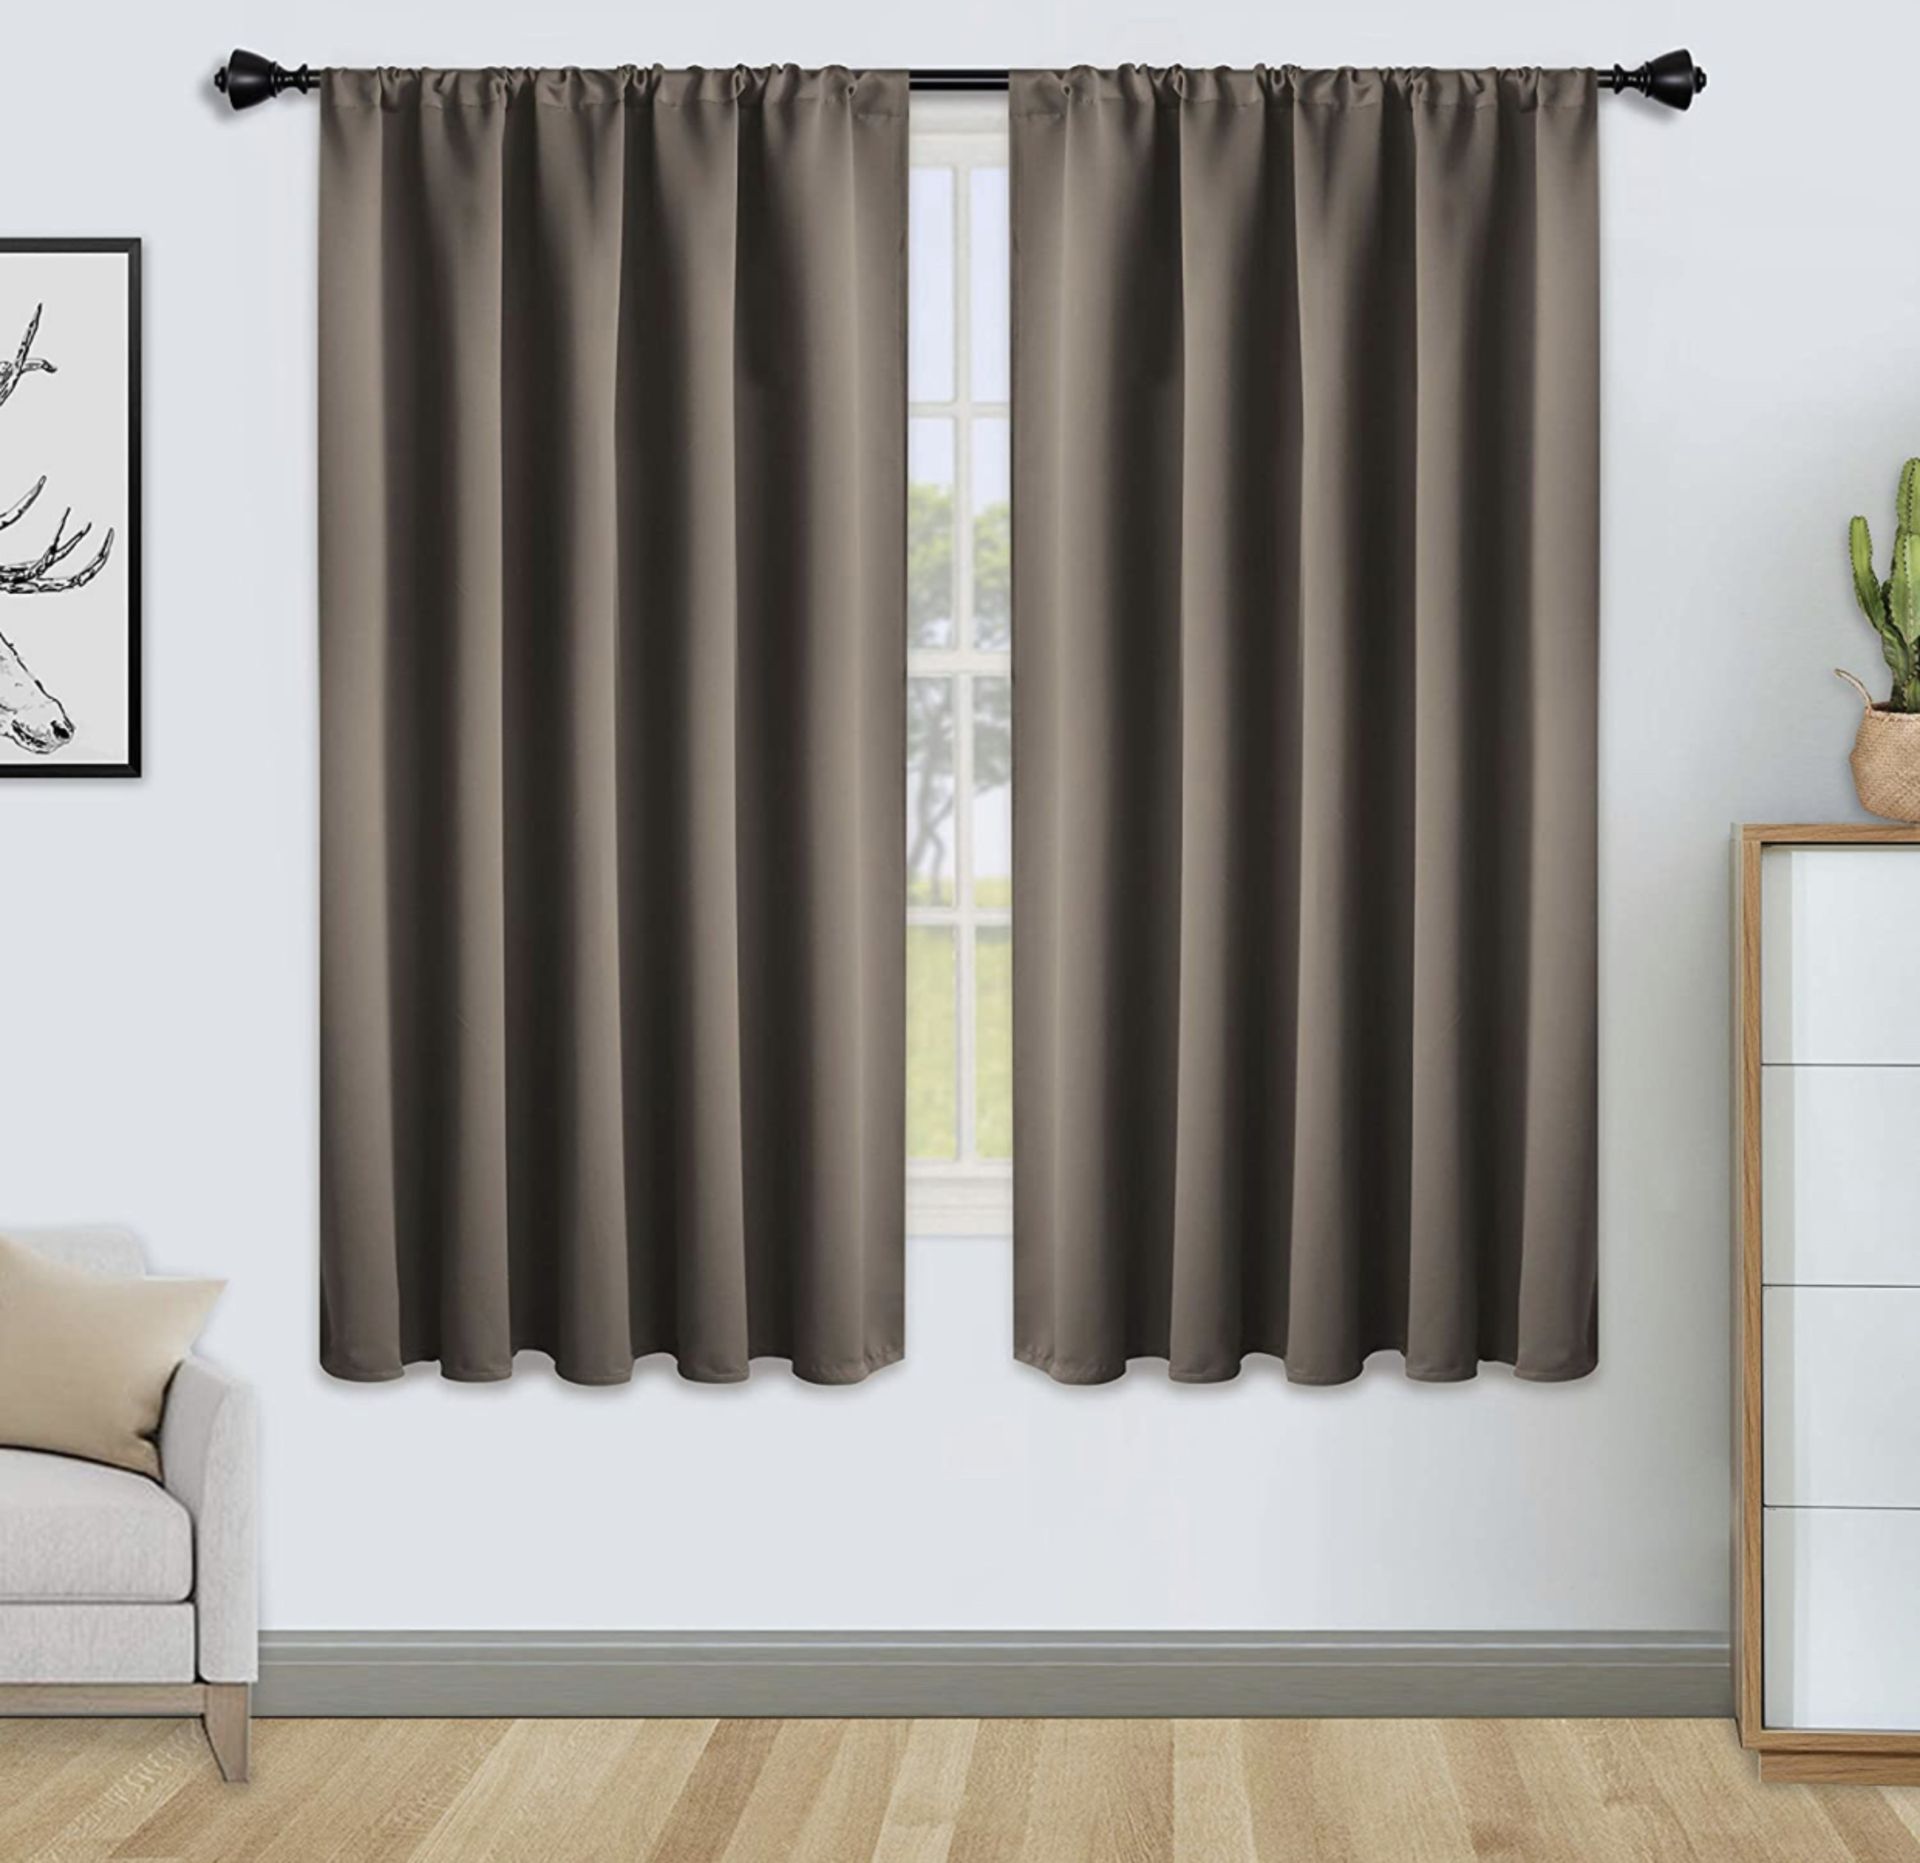 RRP £30.99 Floweroom Blackout Curtains Thermal Insulated Rod Pocket Curtains, 168cm x 137cm